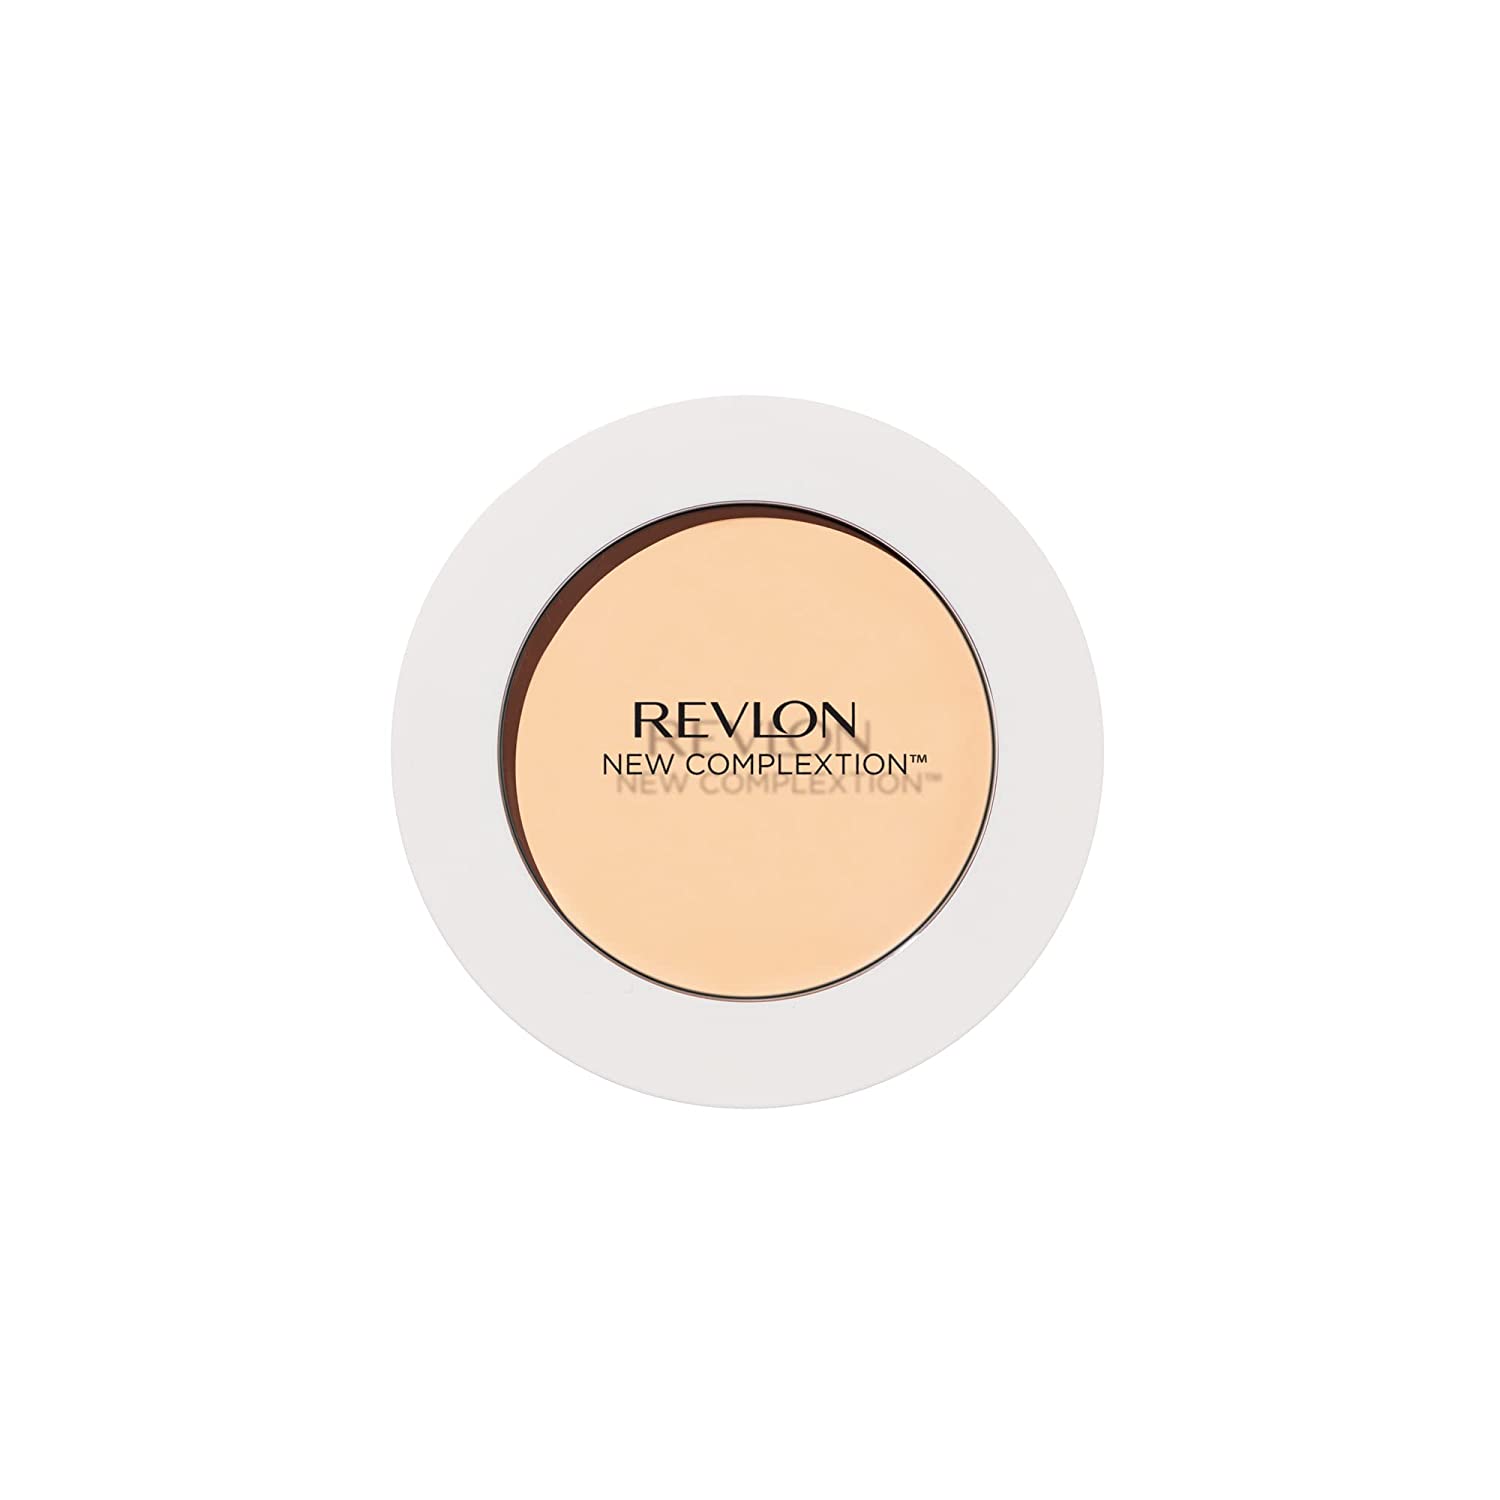 ''Foundation by Revlon, NEW Complexion One-Step Face Makeup, Longwear Light Coverage with Matte Finis